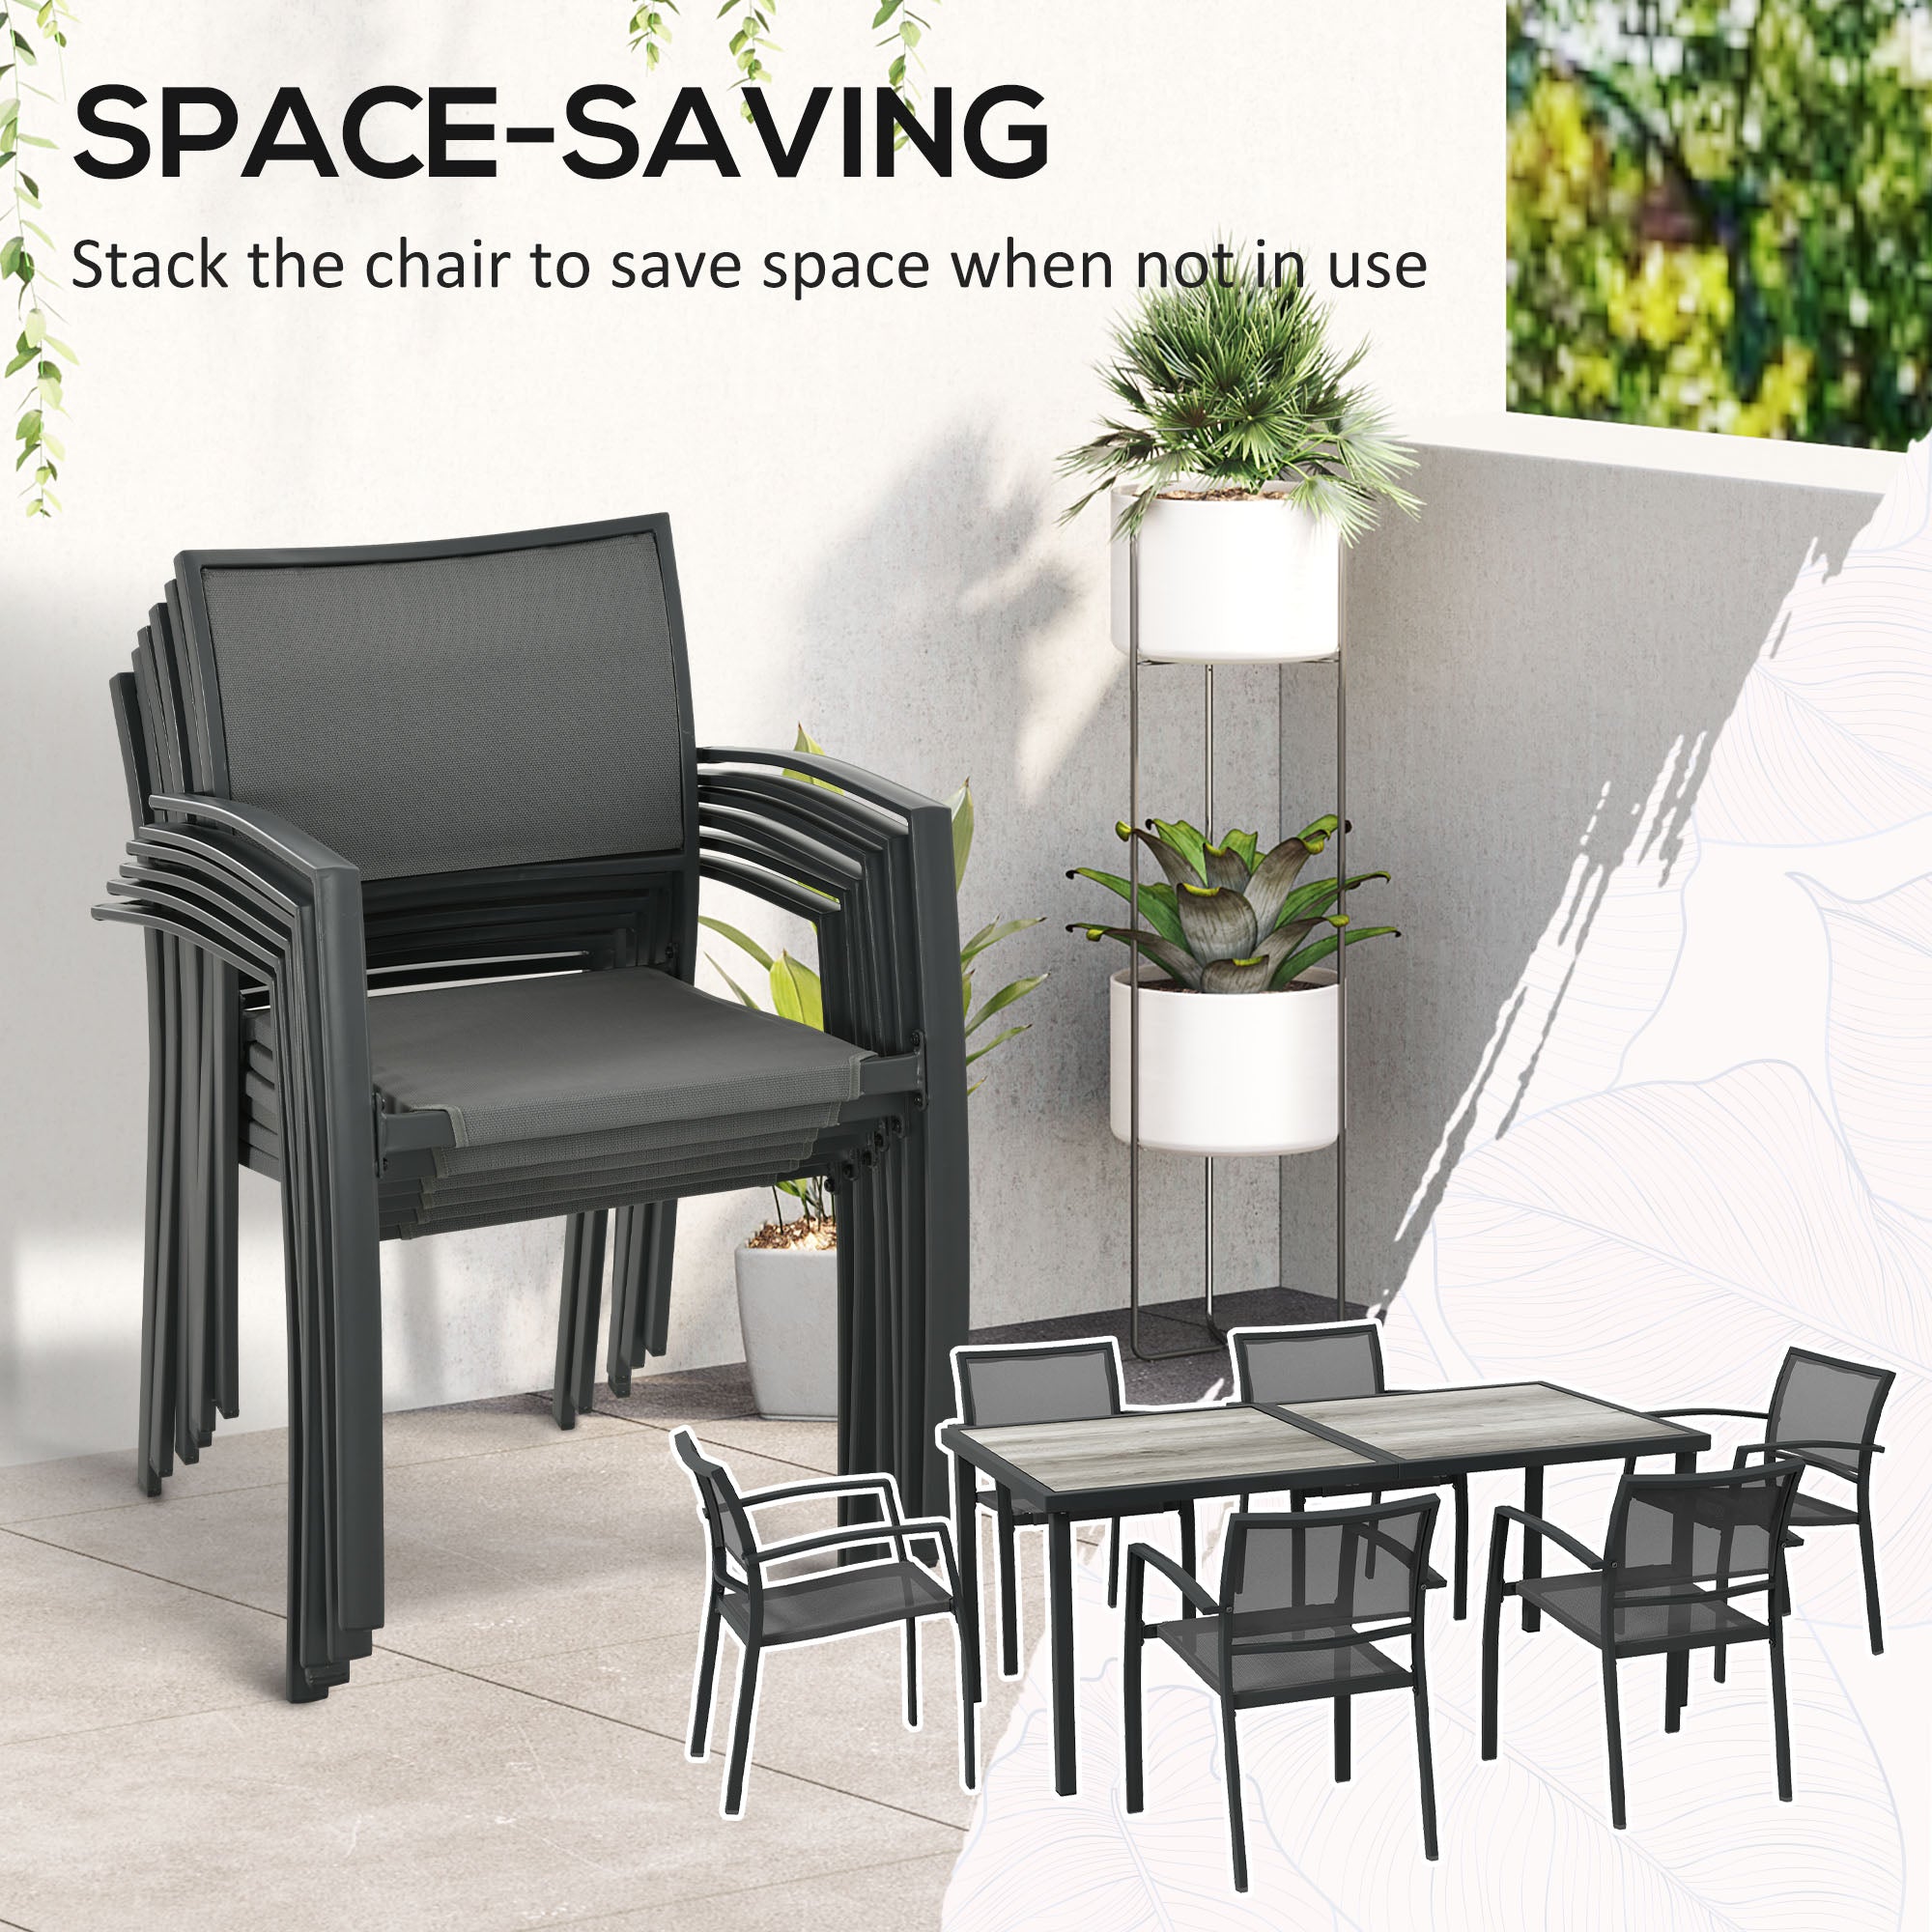 7 Pieces Garden Dining Set, Stackable Chairs, Outdoor Patio Dining Set, 6 Seater Outdoor Table and Chairs with Breathable Mesh Seat, Back, Plastic Top for Poolside, Space-Saving, Grey-3